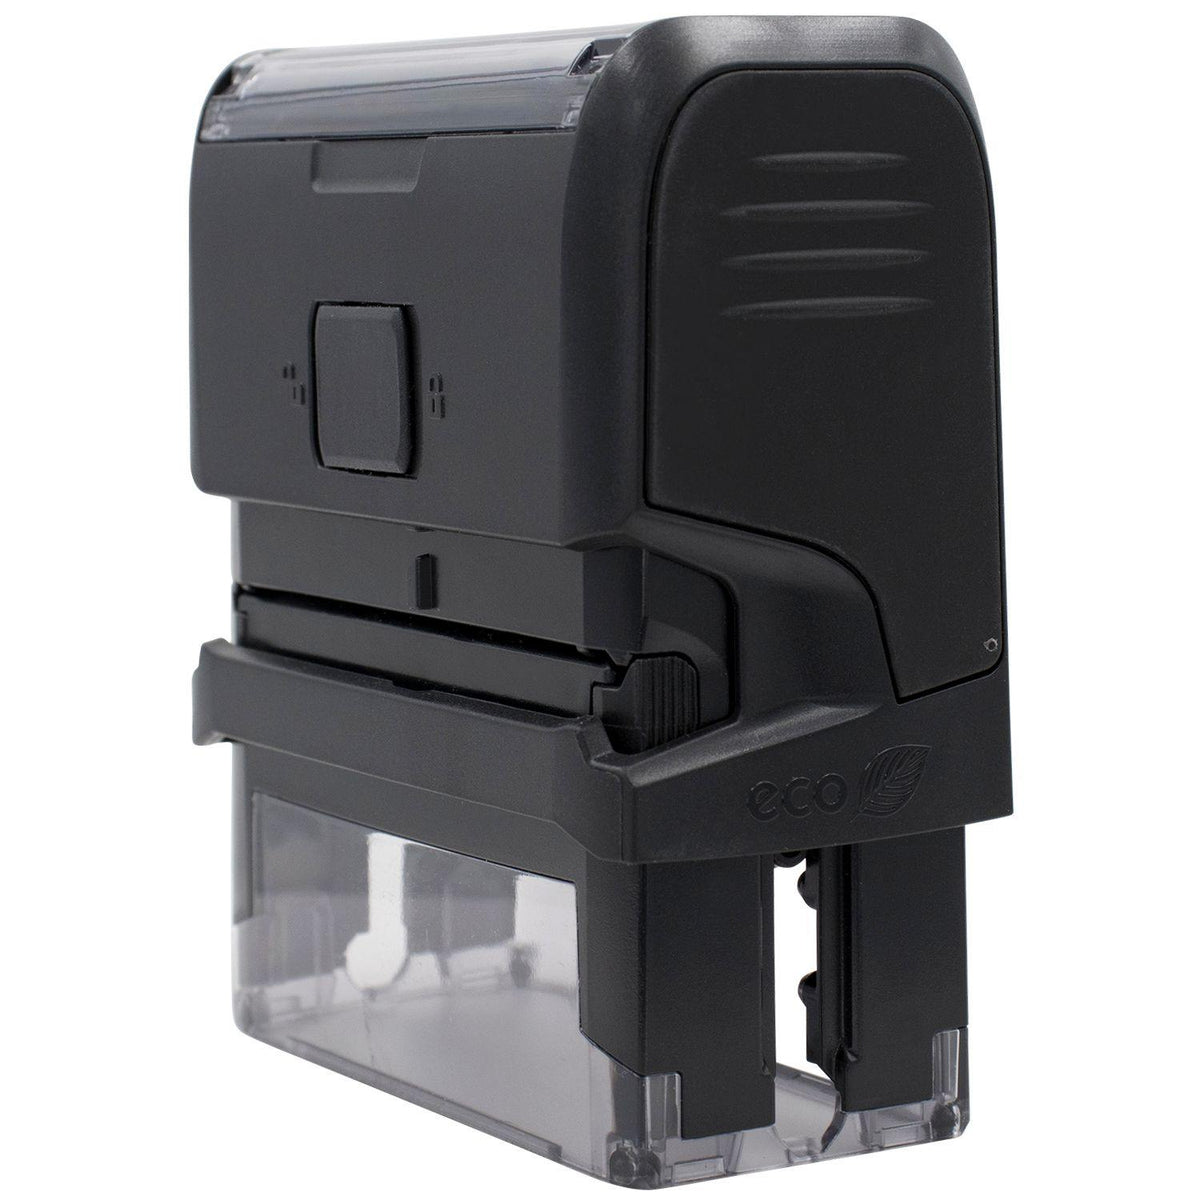 Self Inking Validated Stamp - Engineer Seal Stamps - Brand_Trodat, Impression Size_Small, Stamp Type_Self-Inking Stamp, Type of Use_Office